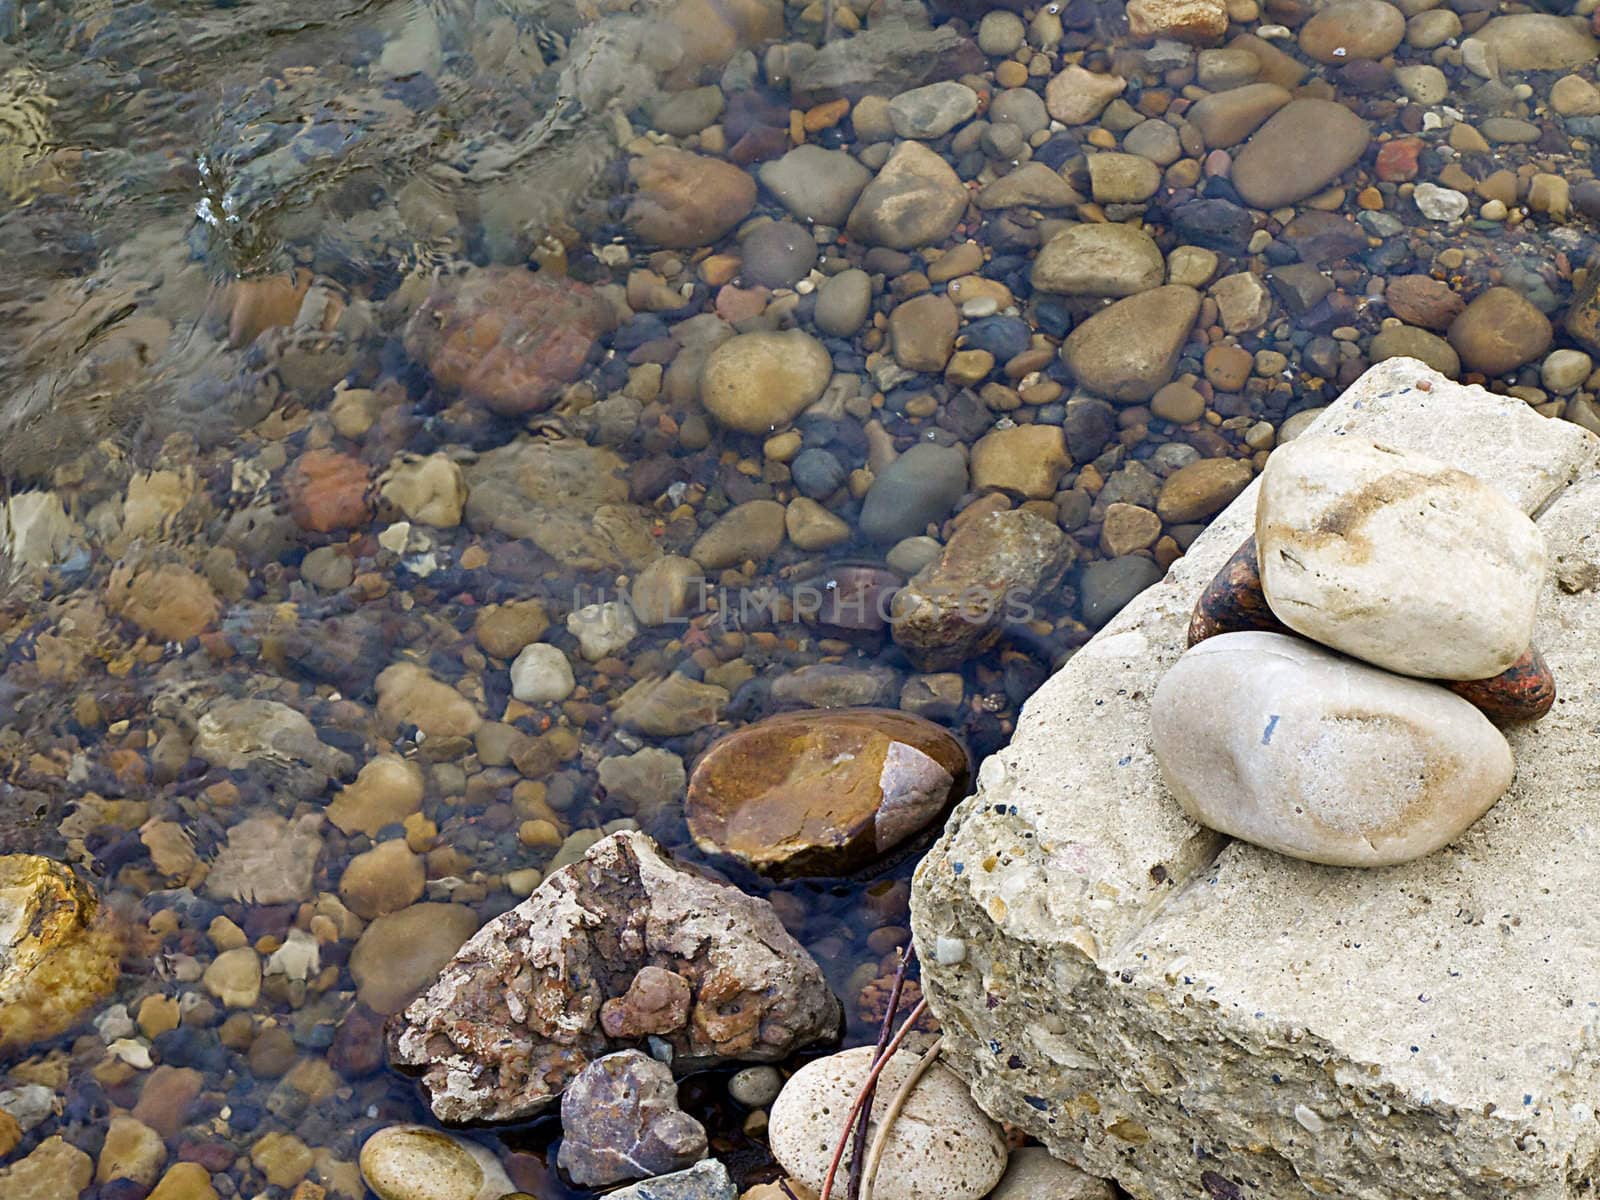 Stones on a block of cement near a icy river bank.